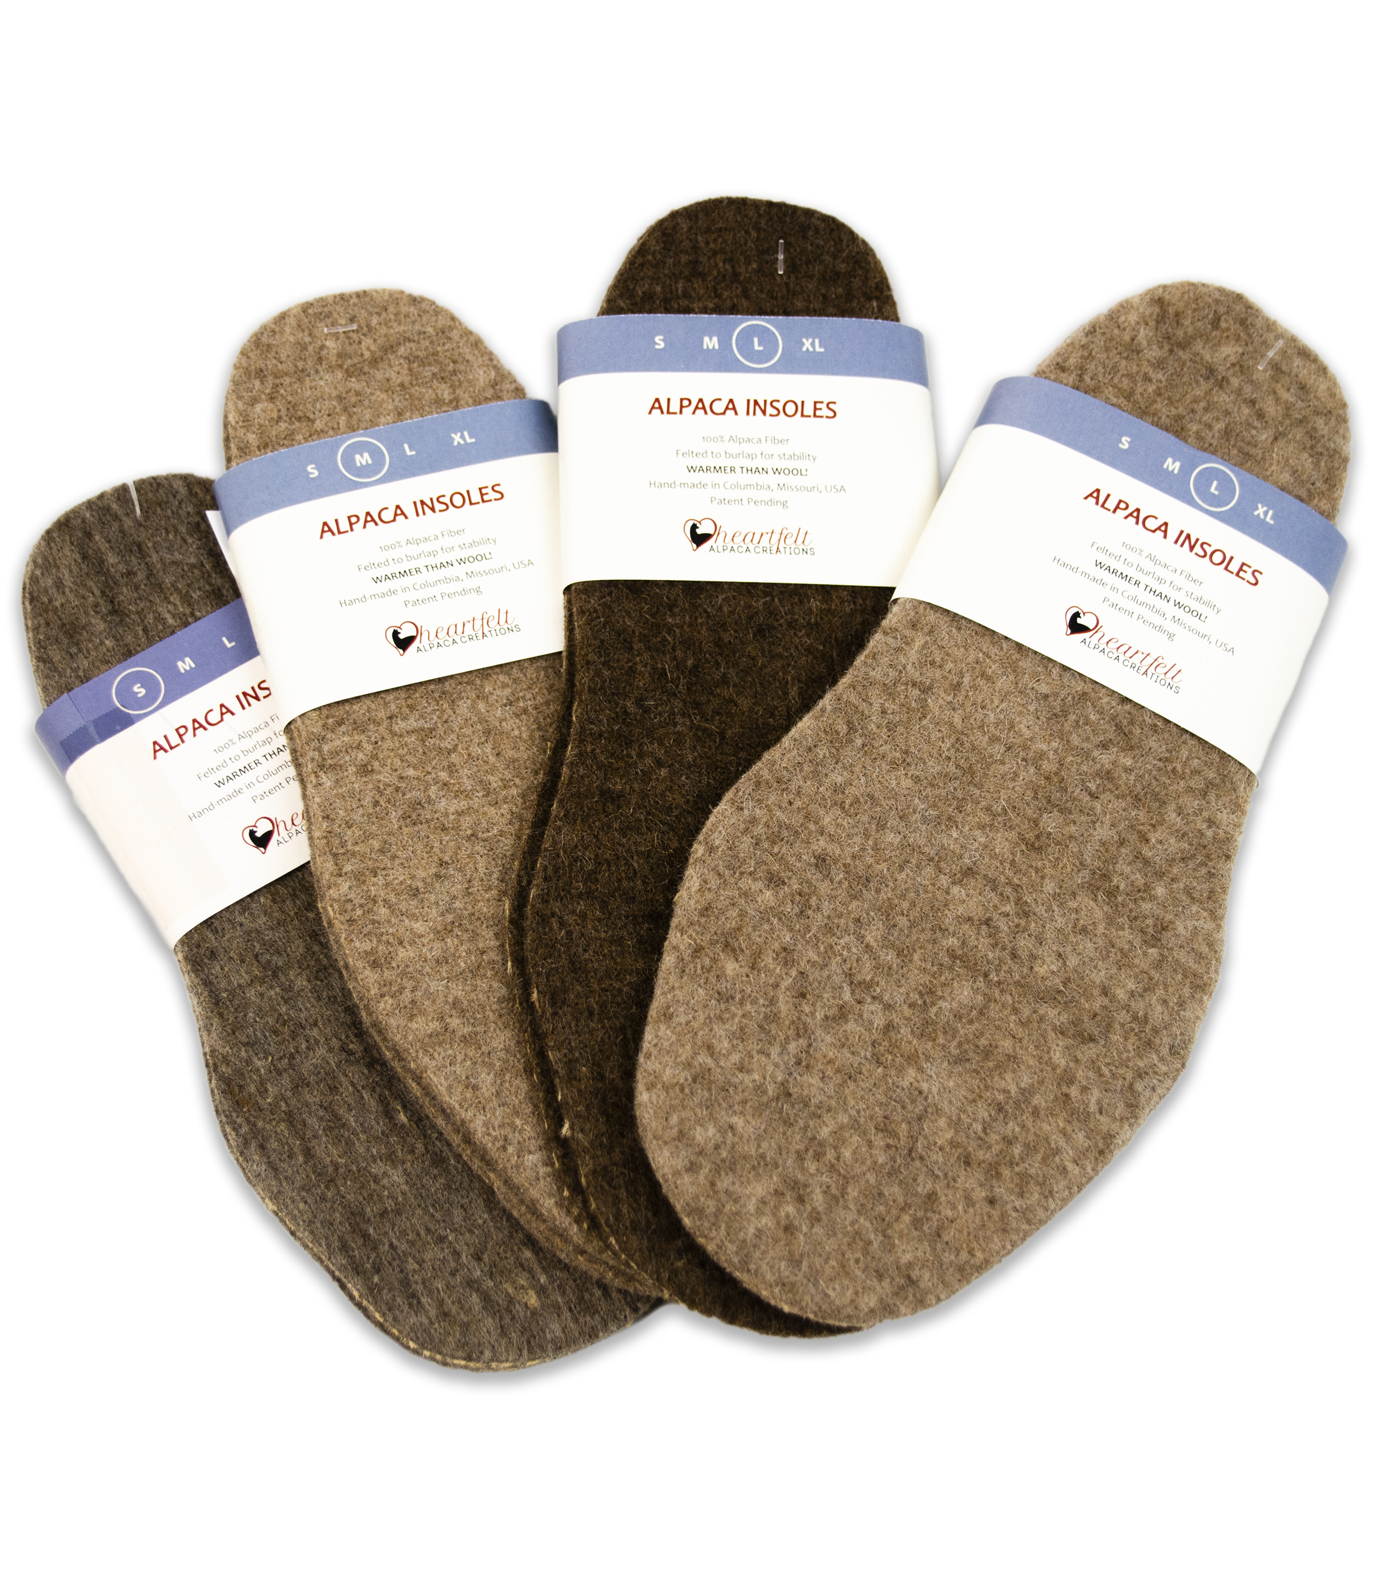 The Felt Store Cork Insoles 2 Pack Size 7